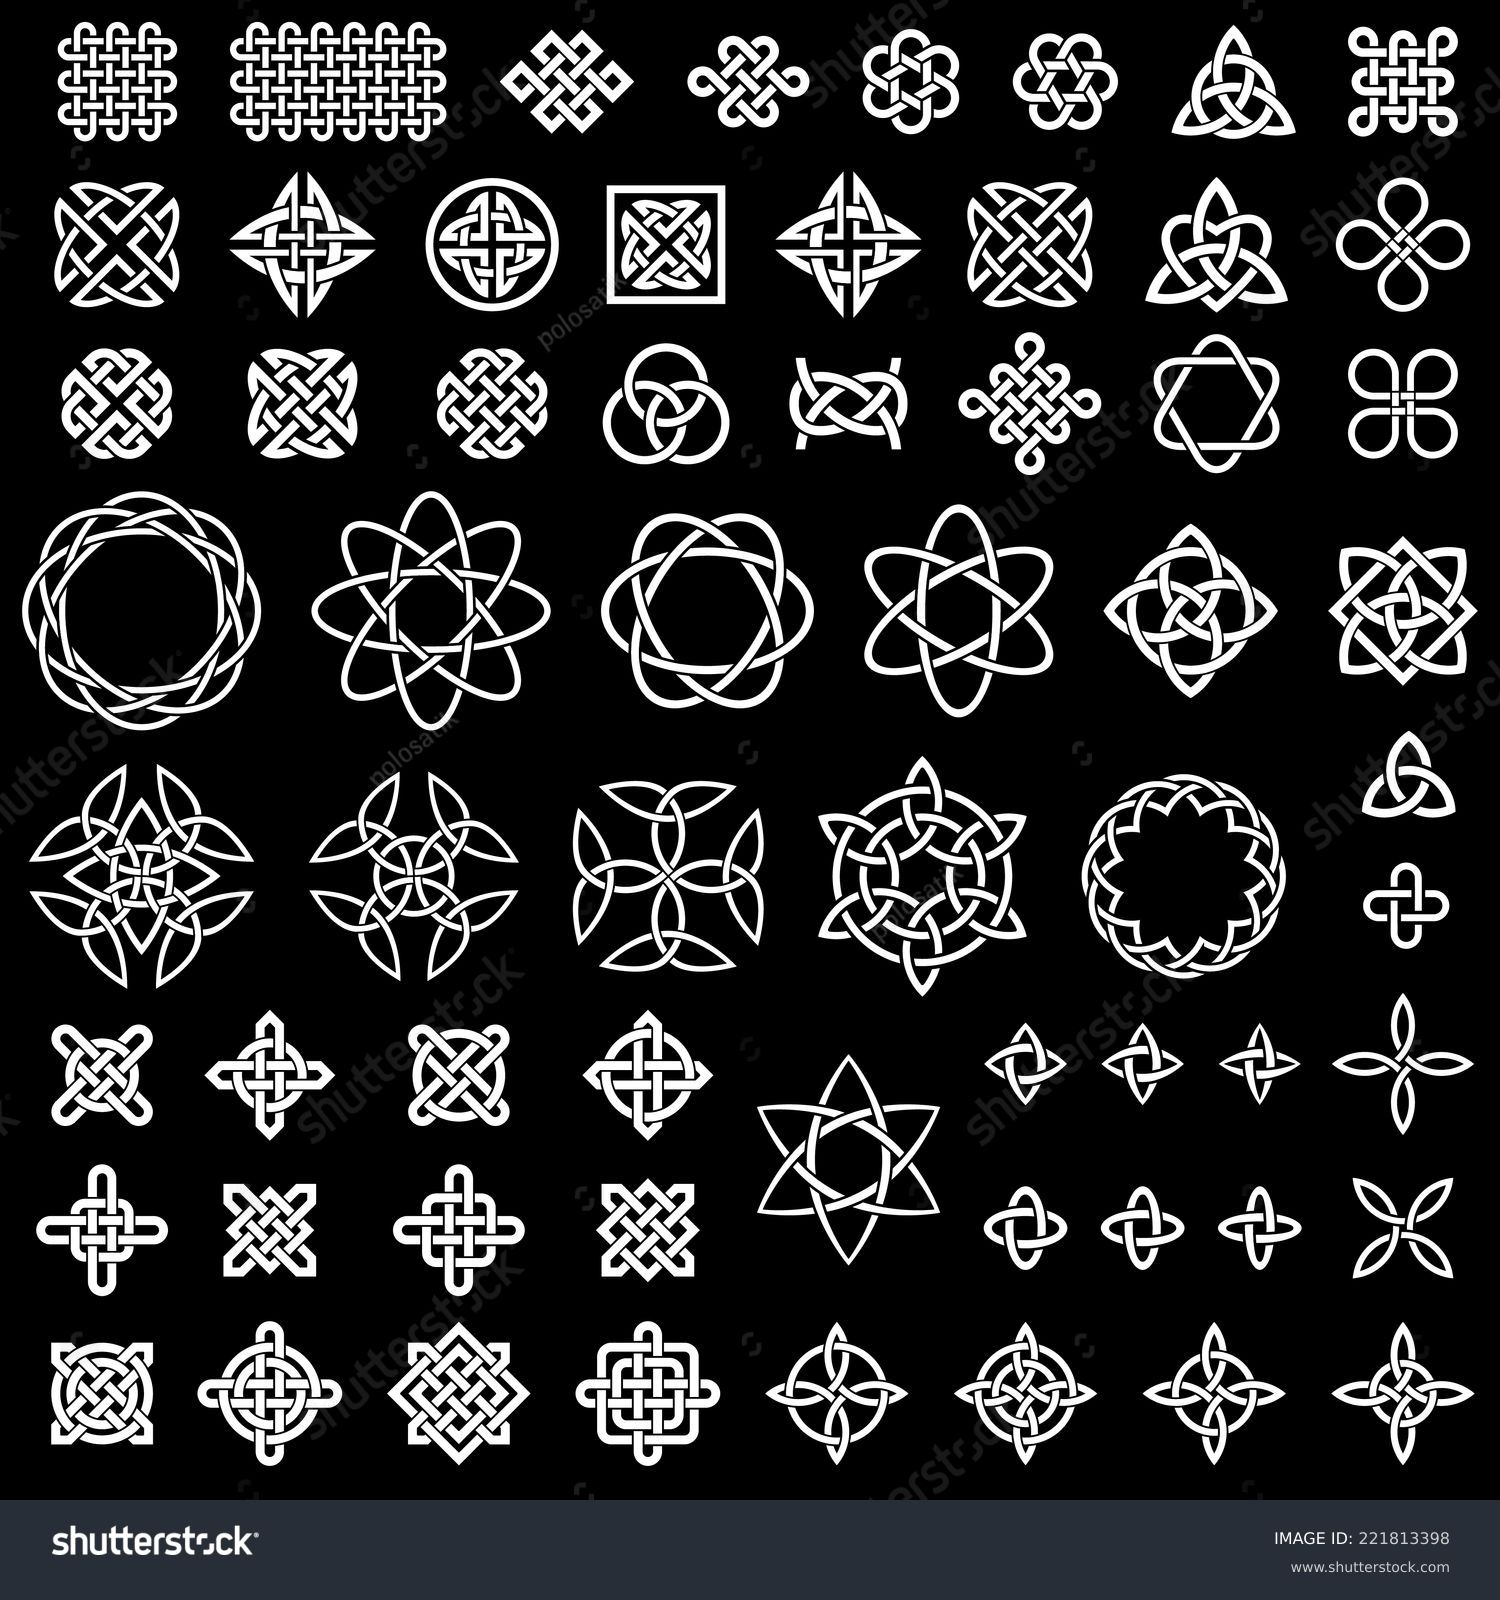 50+ collection of Celtic, Asian (Chinese, Korean, etc.) and other knots for use in your creative projects (vector illustration) #221813398